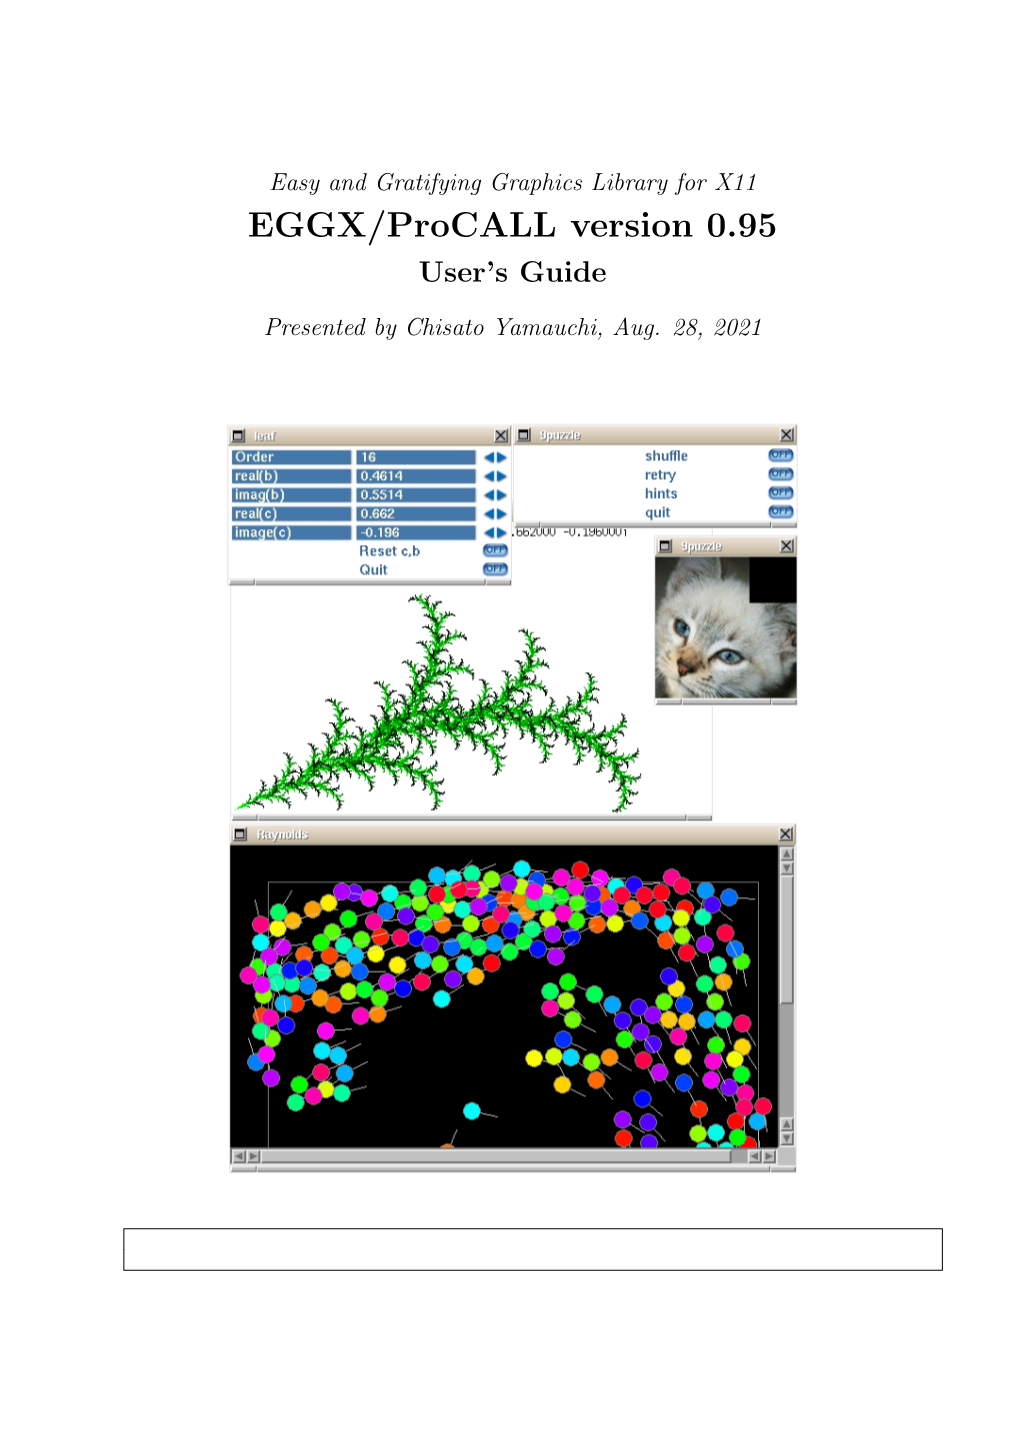 EGGX/Procall Version 0.95 User’S Guide